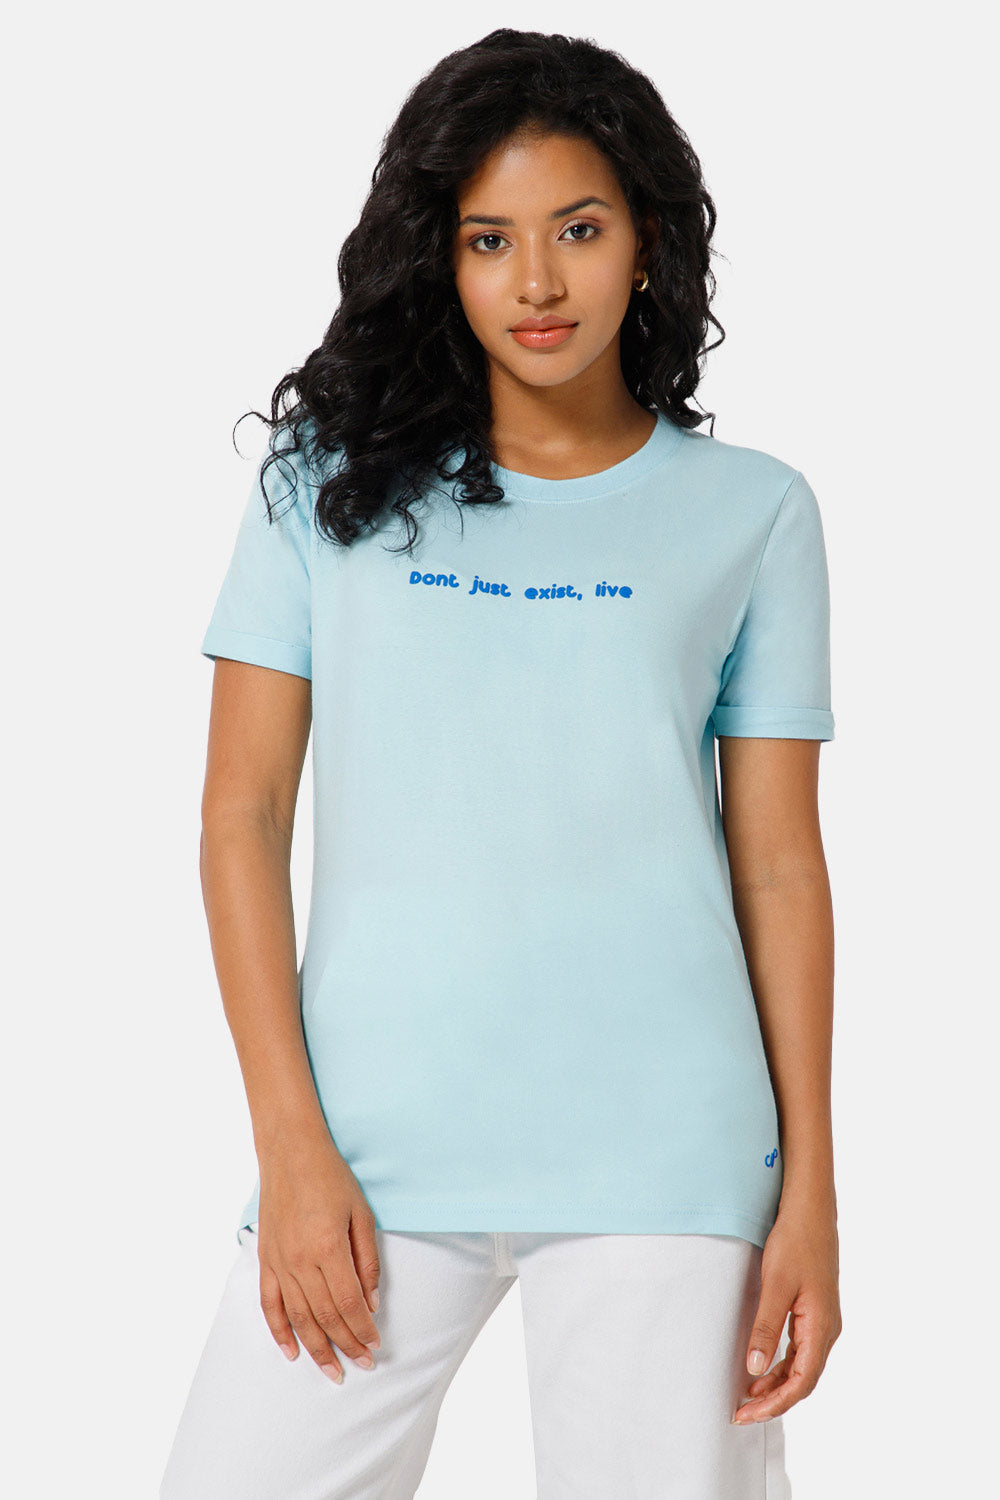 Fabulous and Comfortable Women's T-shirts Online